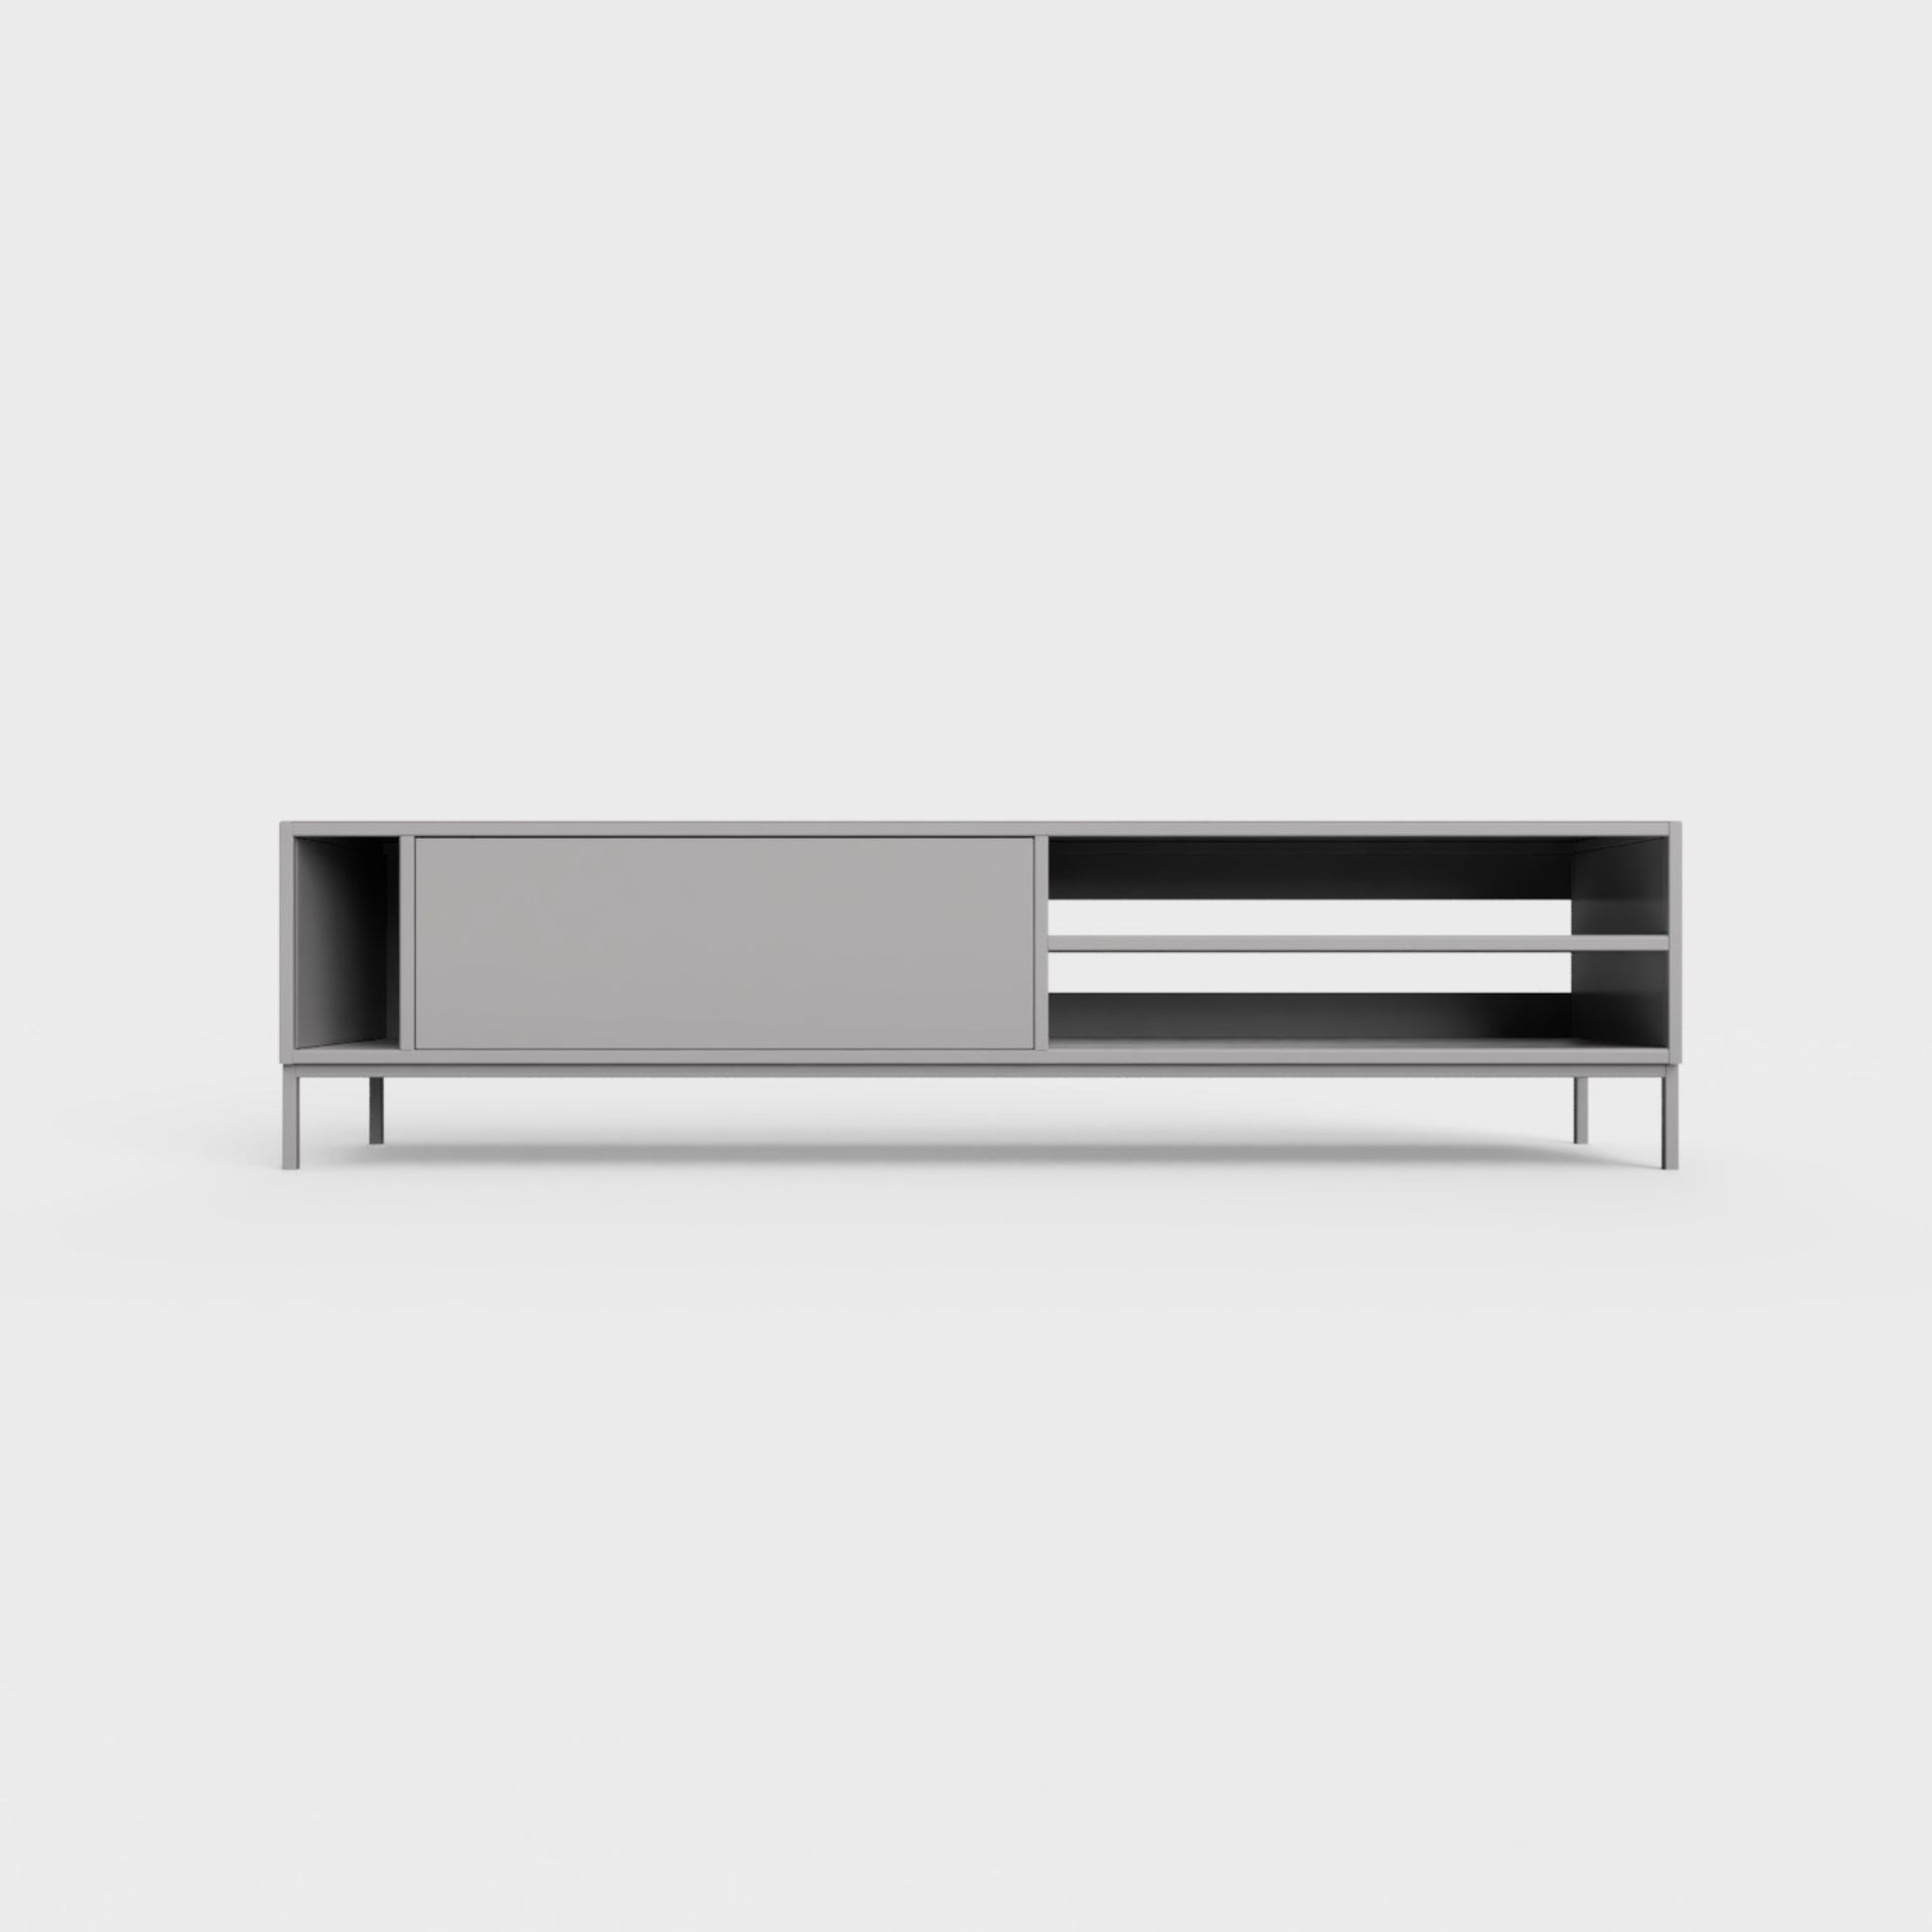 Prunus 03 Lowboard in ashen gray, powder-coated steel, elegant and modern piece of furniture for your living room